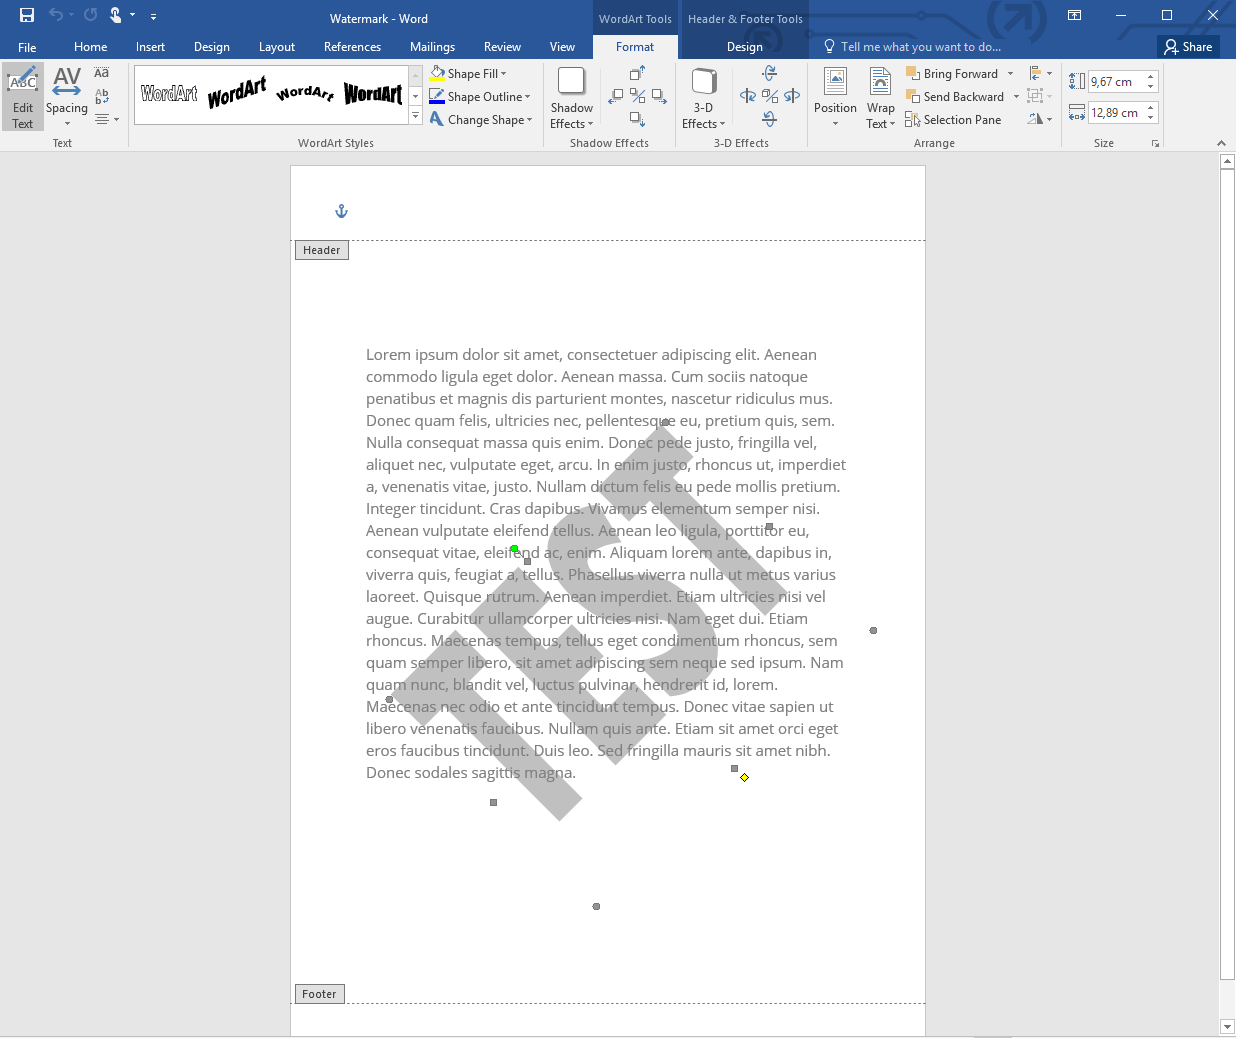 Open the header area to remove a watermark in Word